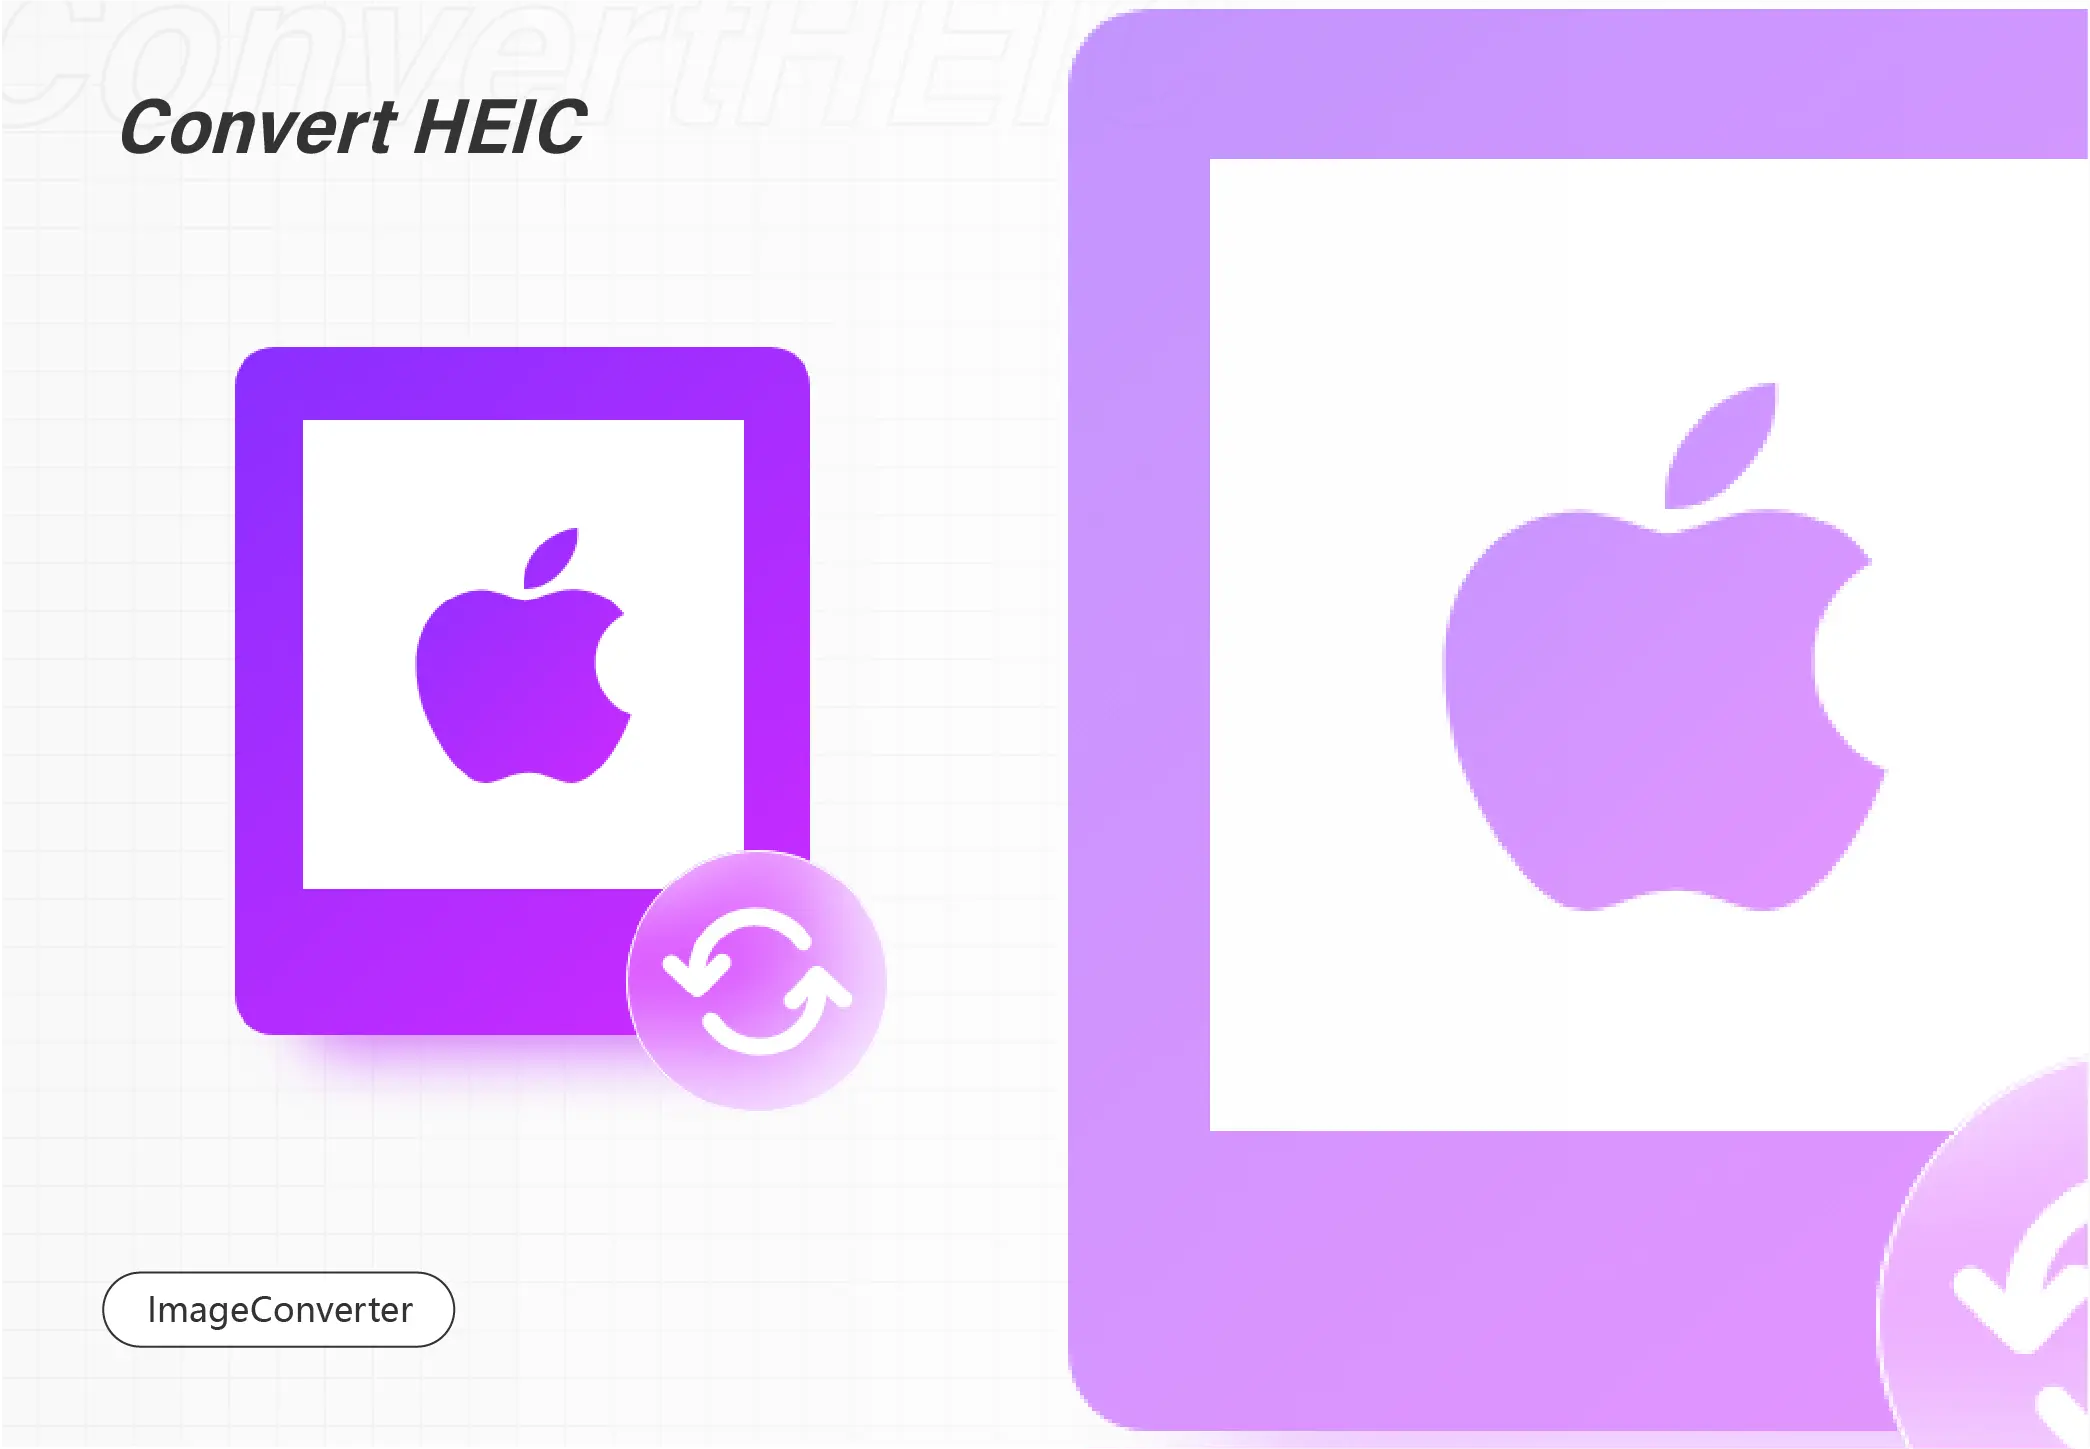 How to Convert HEIC to JPG on Windows in 2022